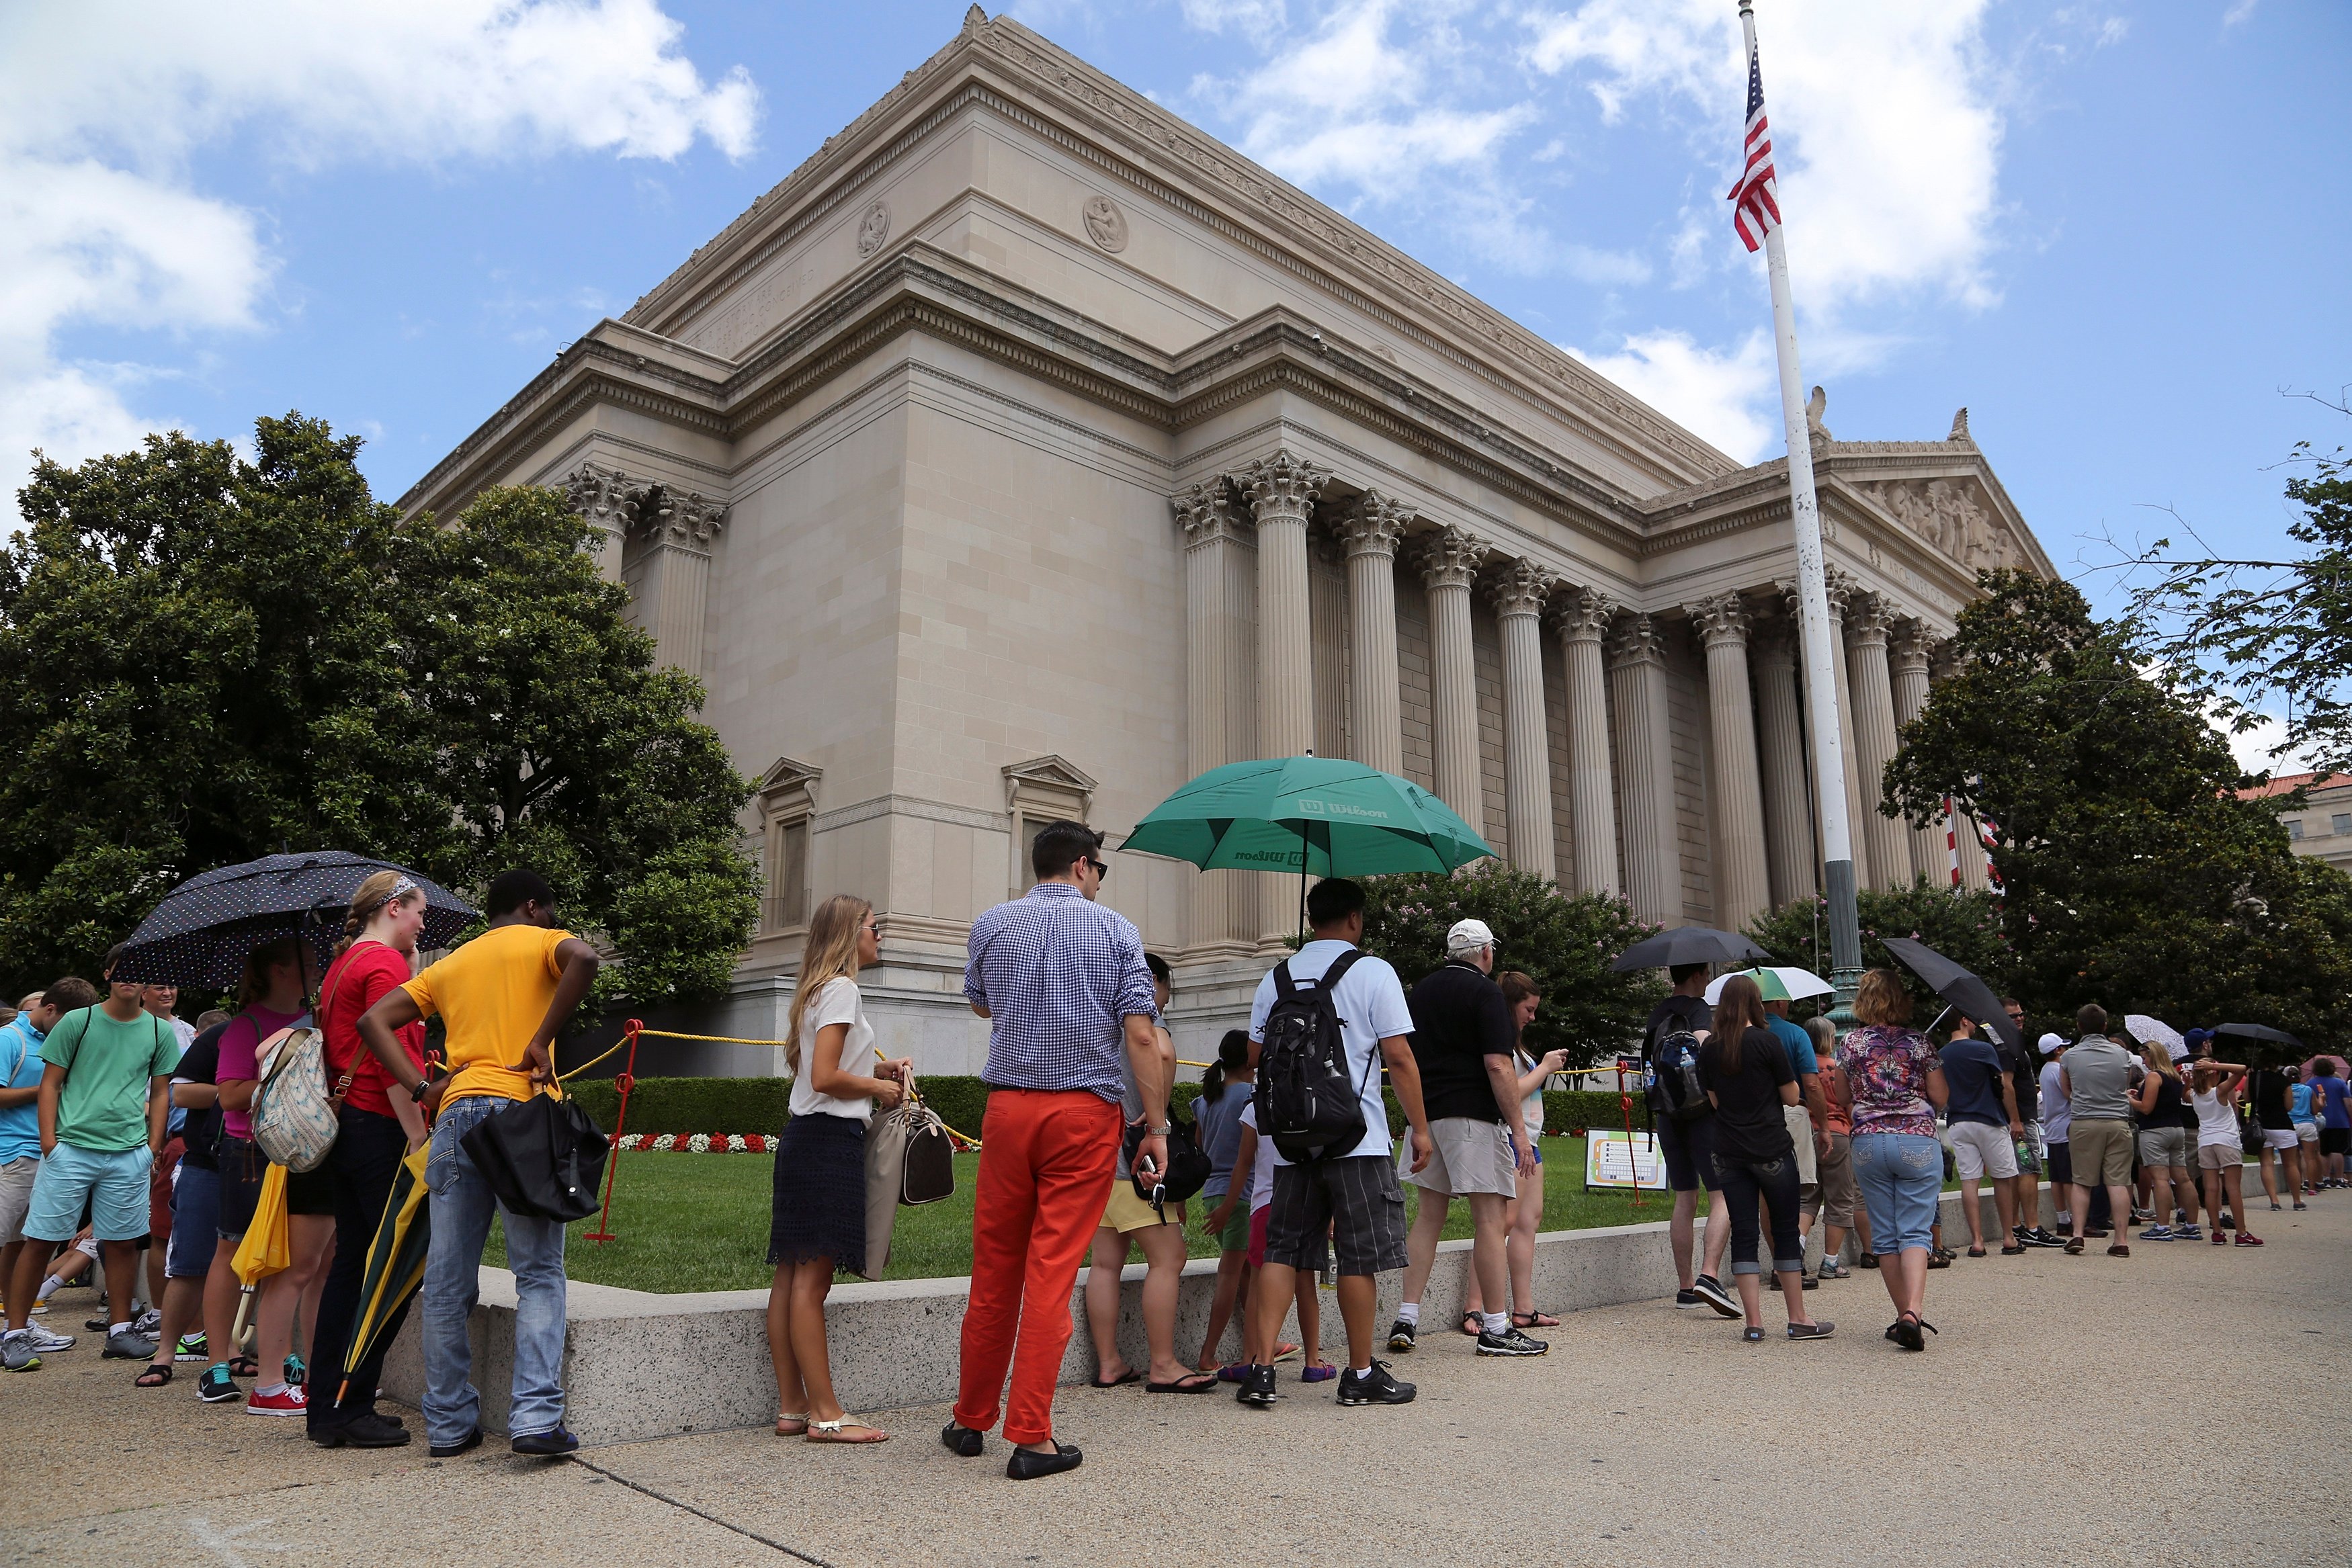 FILE -- Visitors wait in line to enter the National Archives, where the Declaration of Independence is displayed, ahead of the Fourth of July Independence Day observance in Washington, July 3, 2013. REUTERS/Jonathan Ernst 